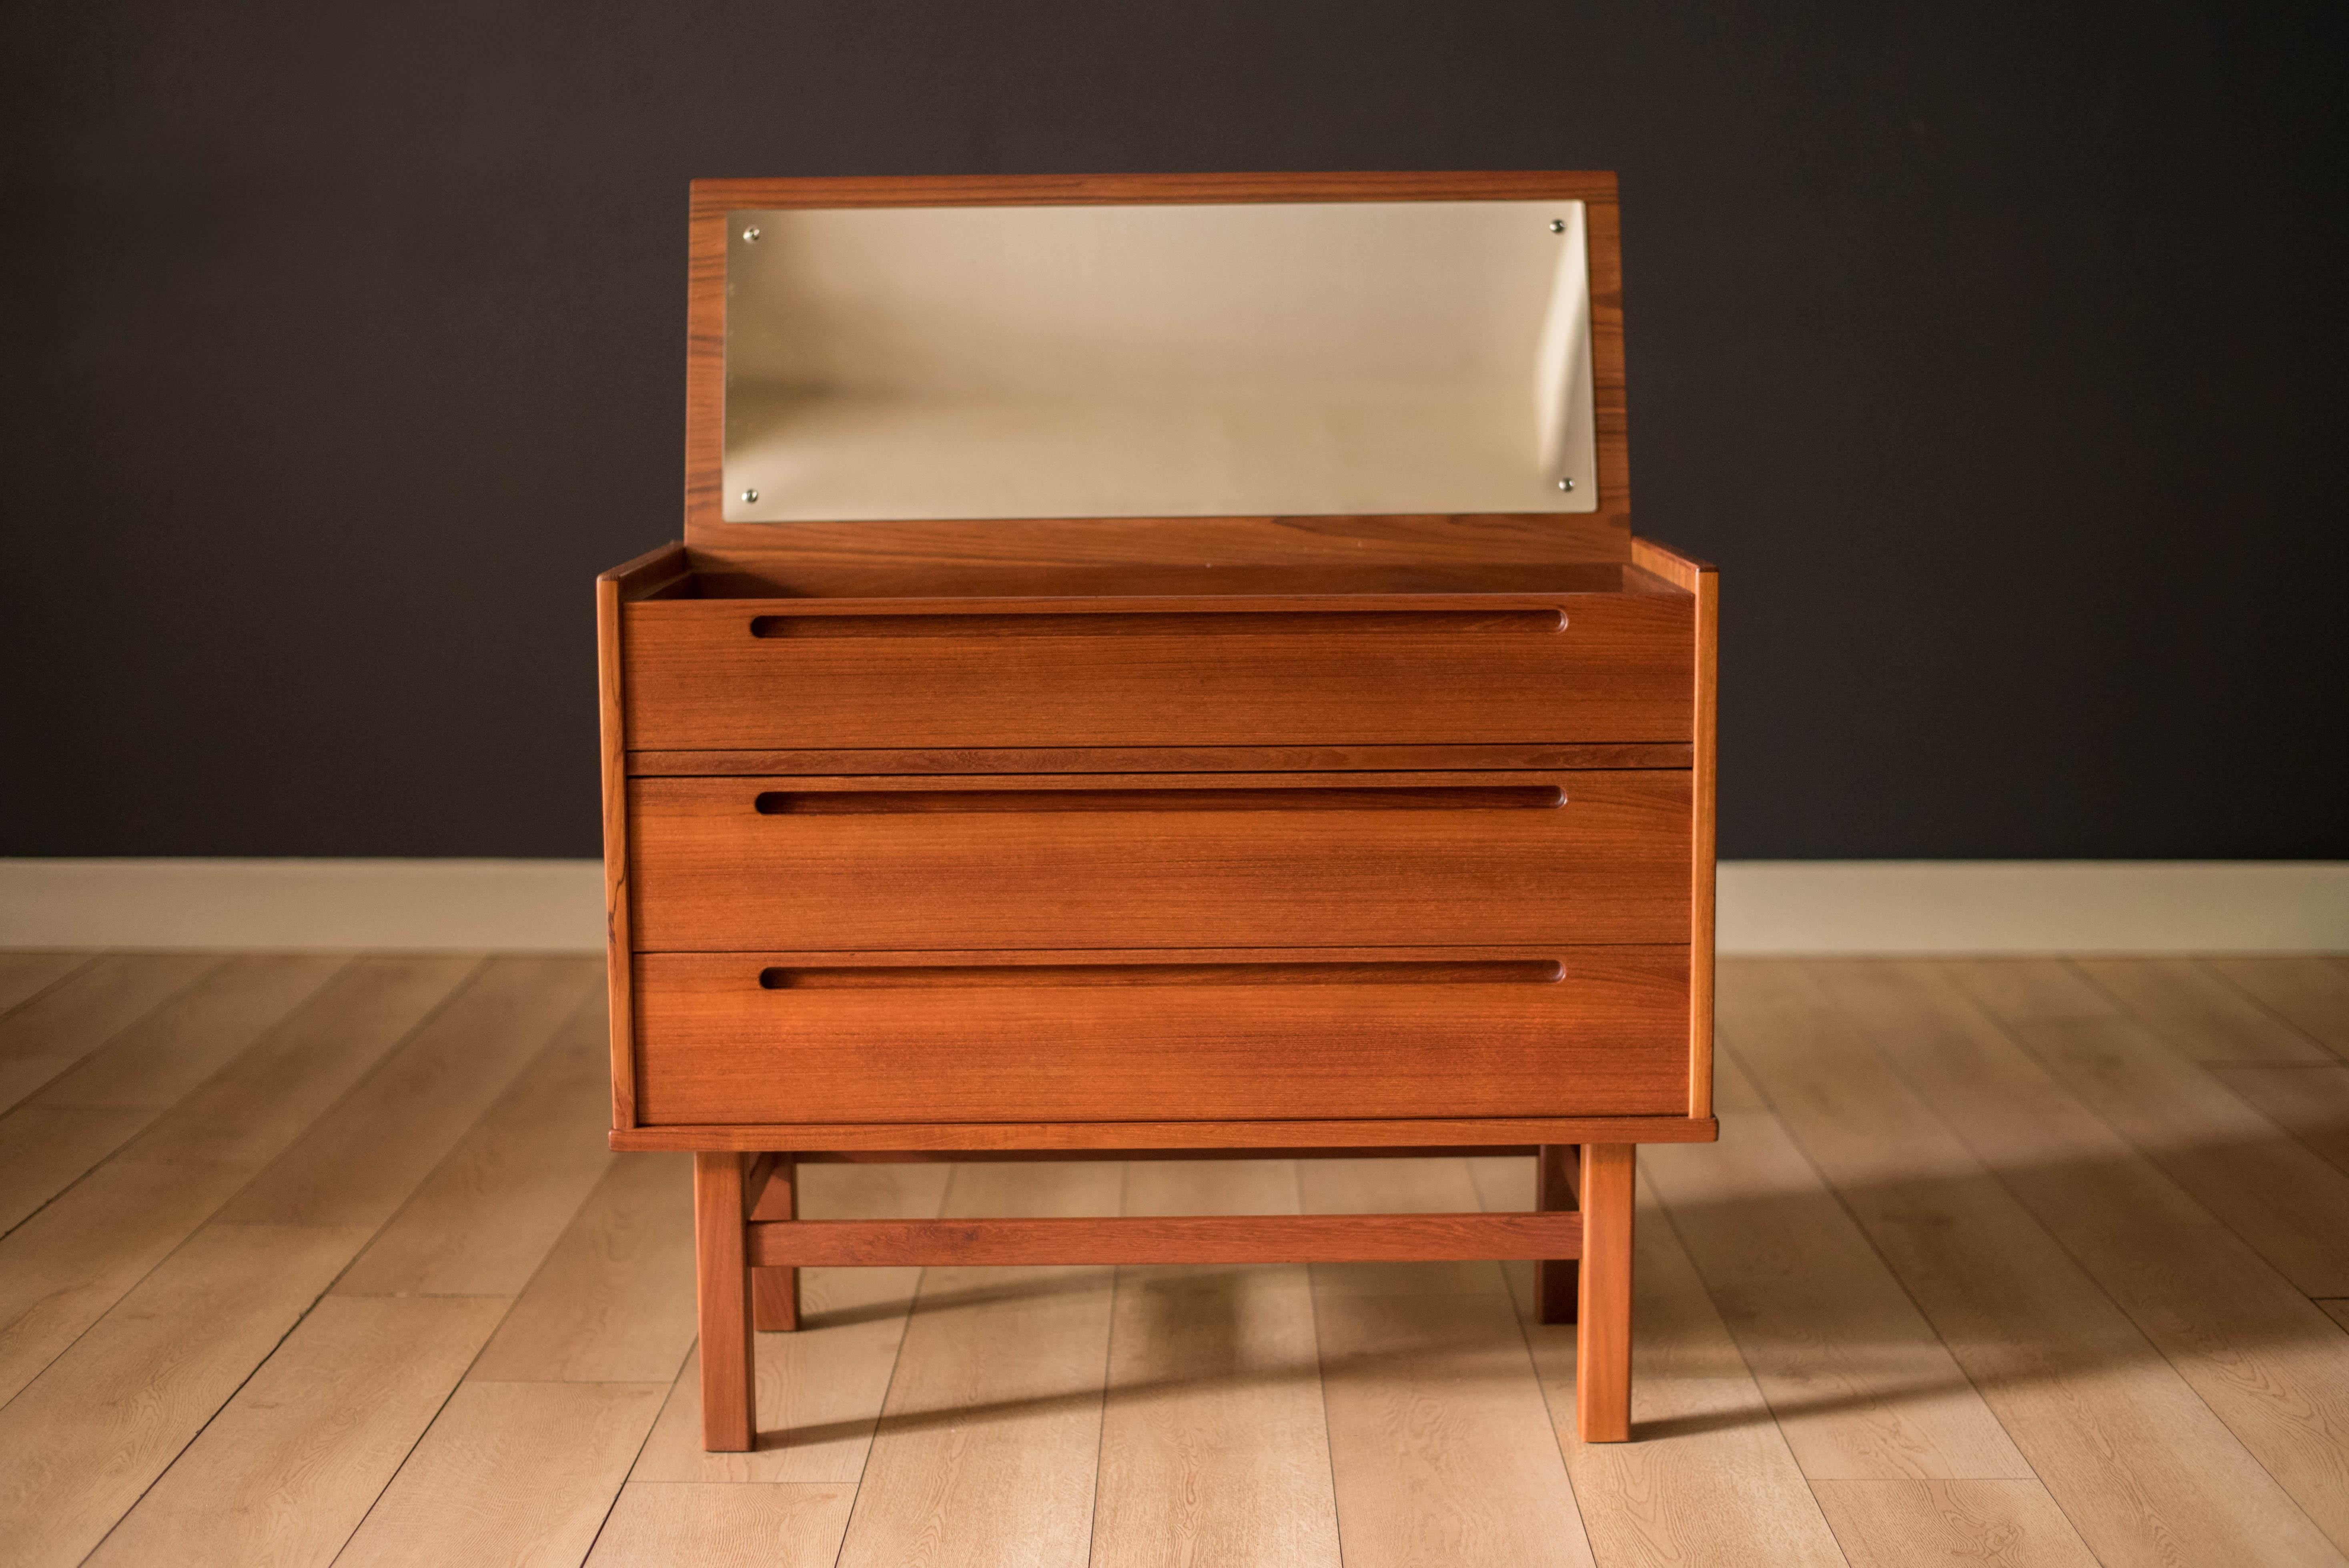 Mid-Century Modern dresser chest in teak designed by Nils Jonsson circa 1960s. Equipped with three storage drawers accessorized with sculpted inset pulls and dovetail construction. Features a hidden mirror vanity and a finished teak interior drawer